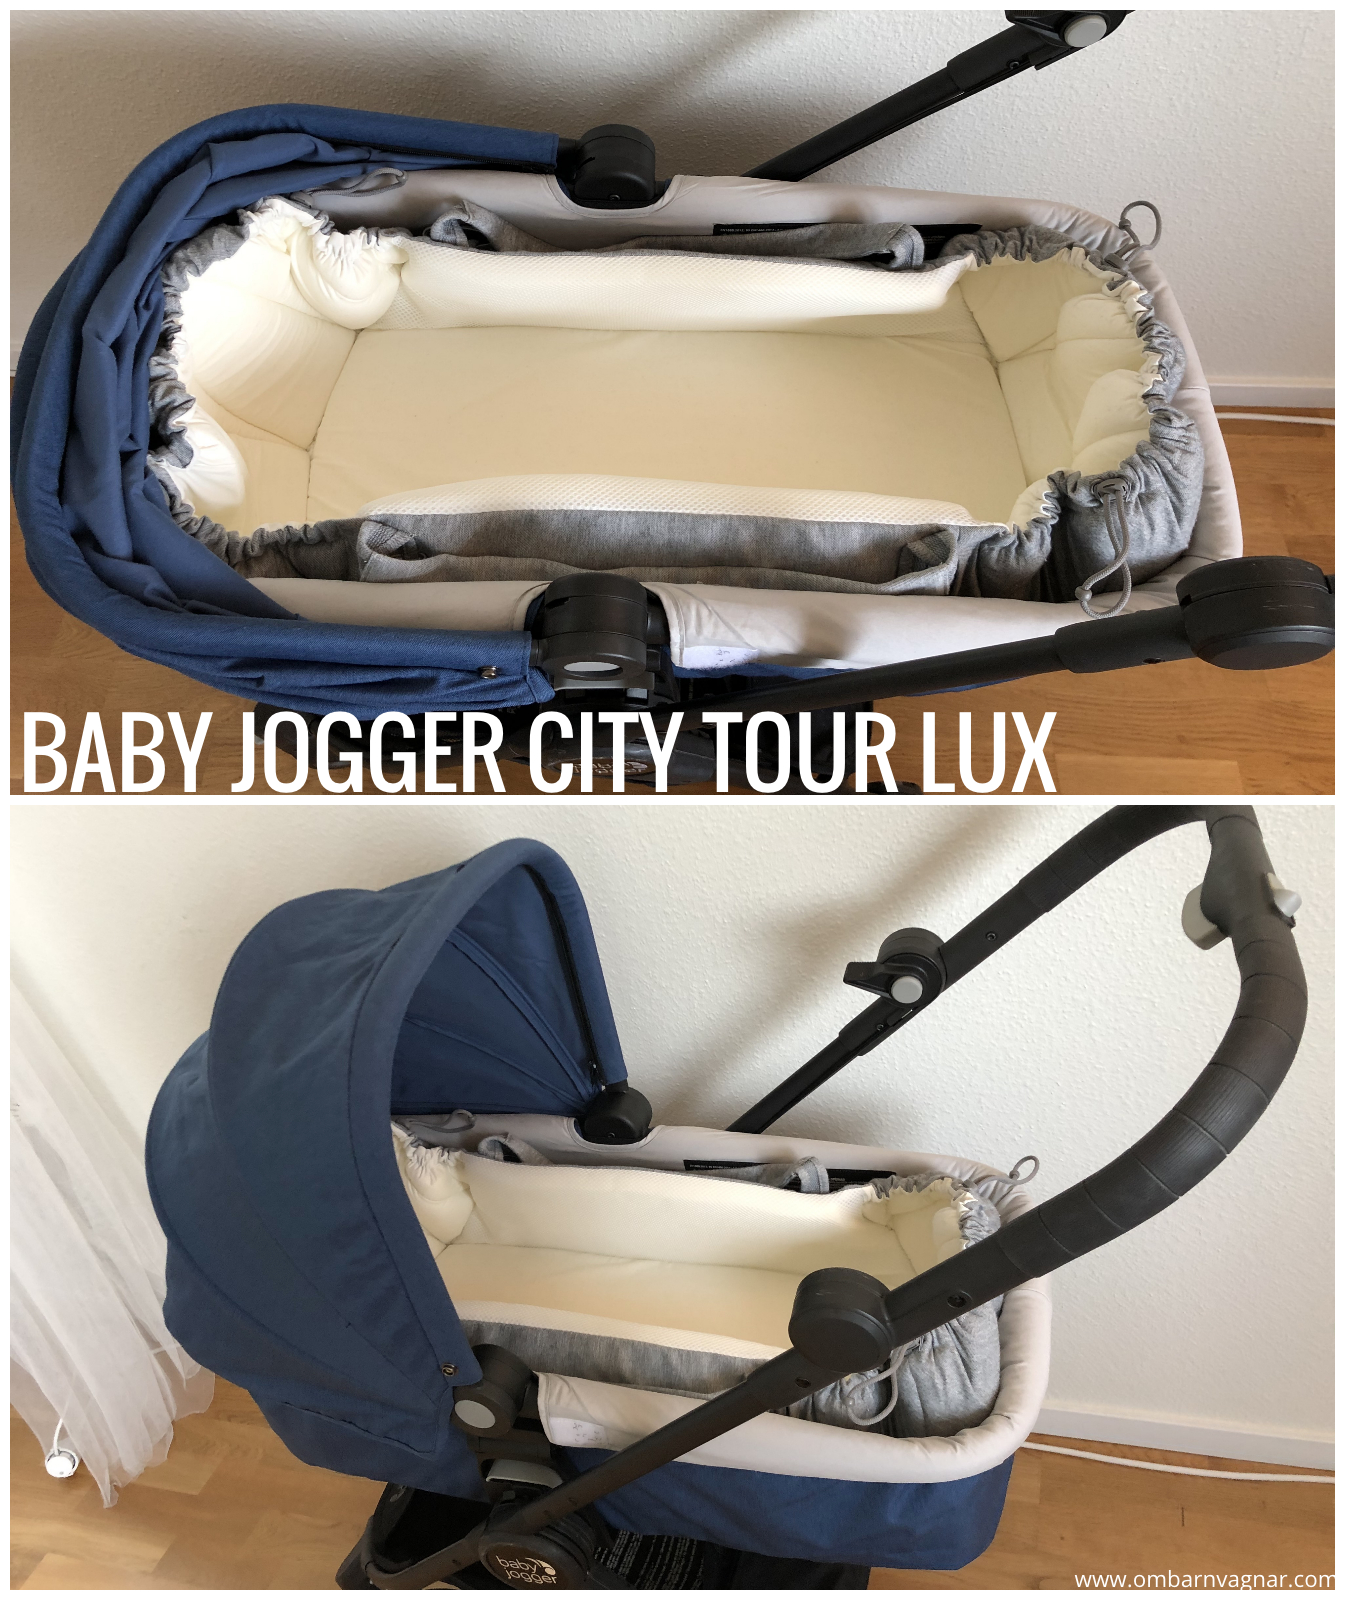 Najell SleepCarrier Mjuklift i Baby Jogger City Tour Lux